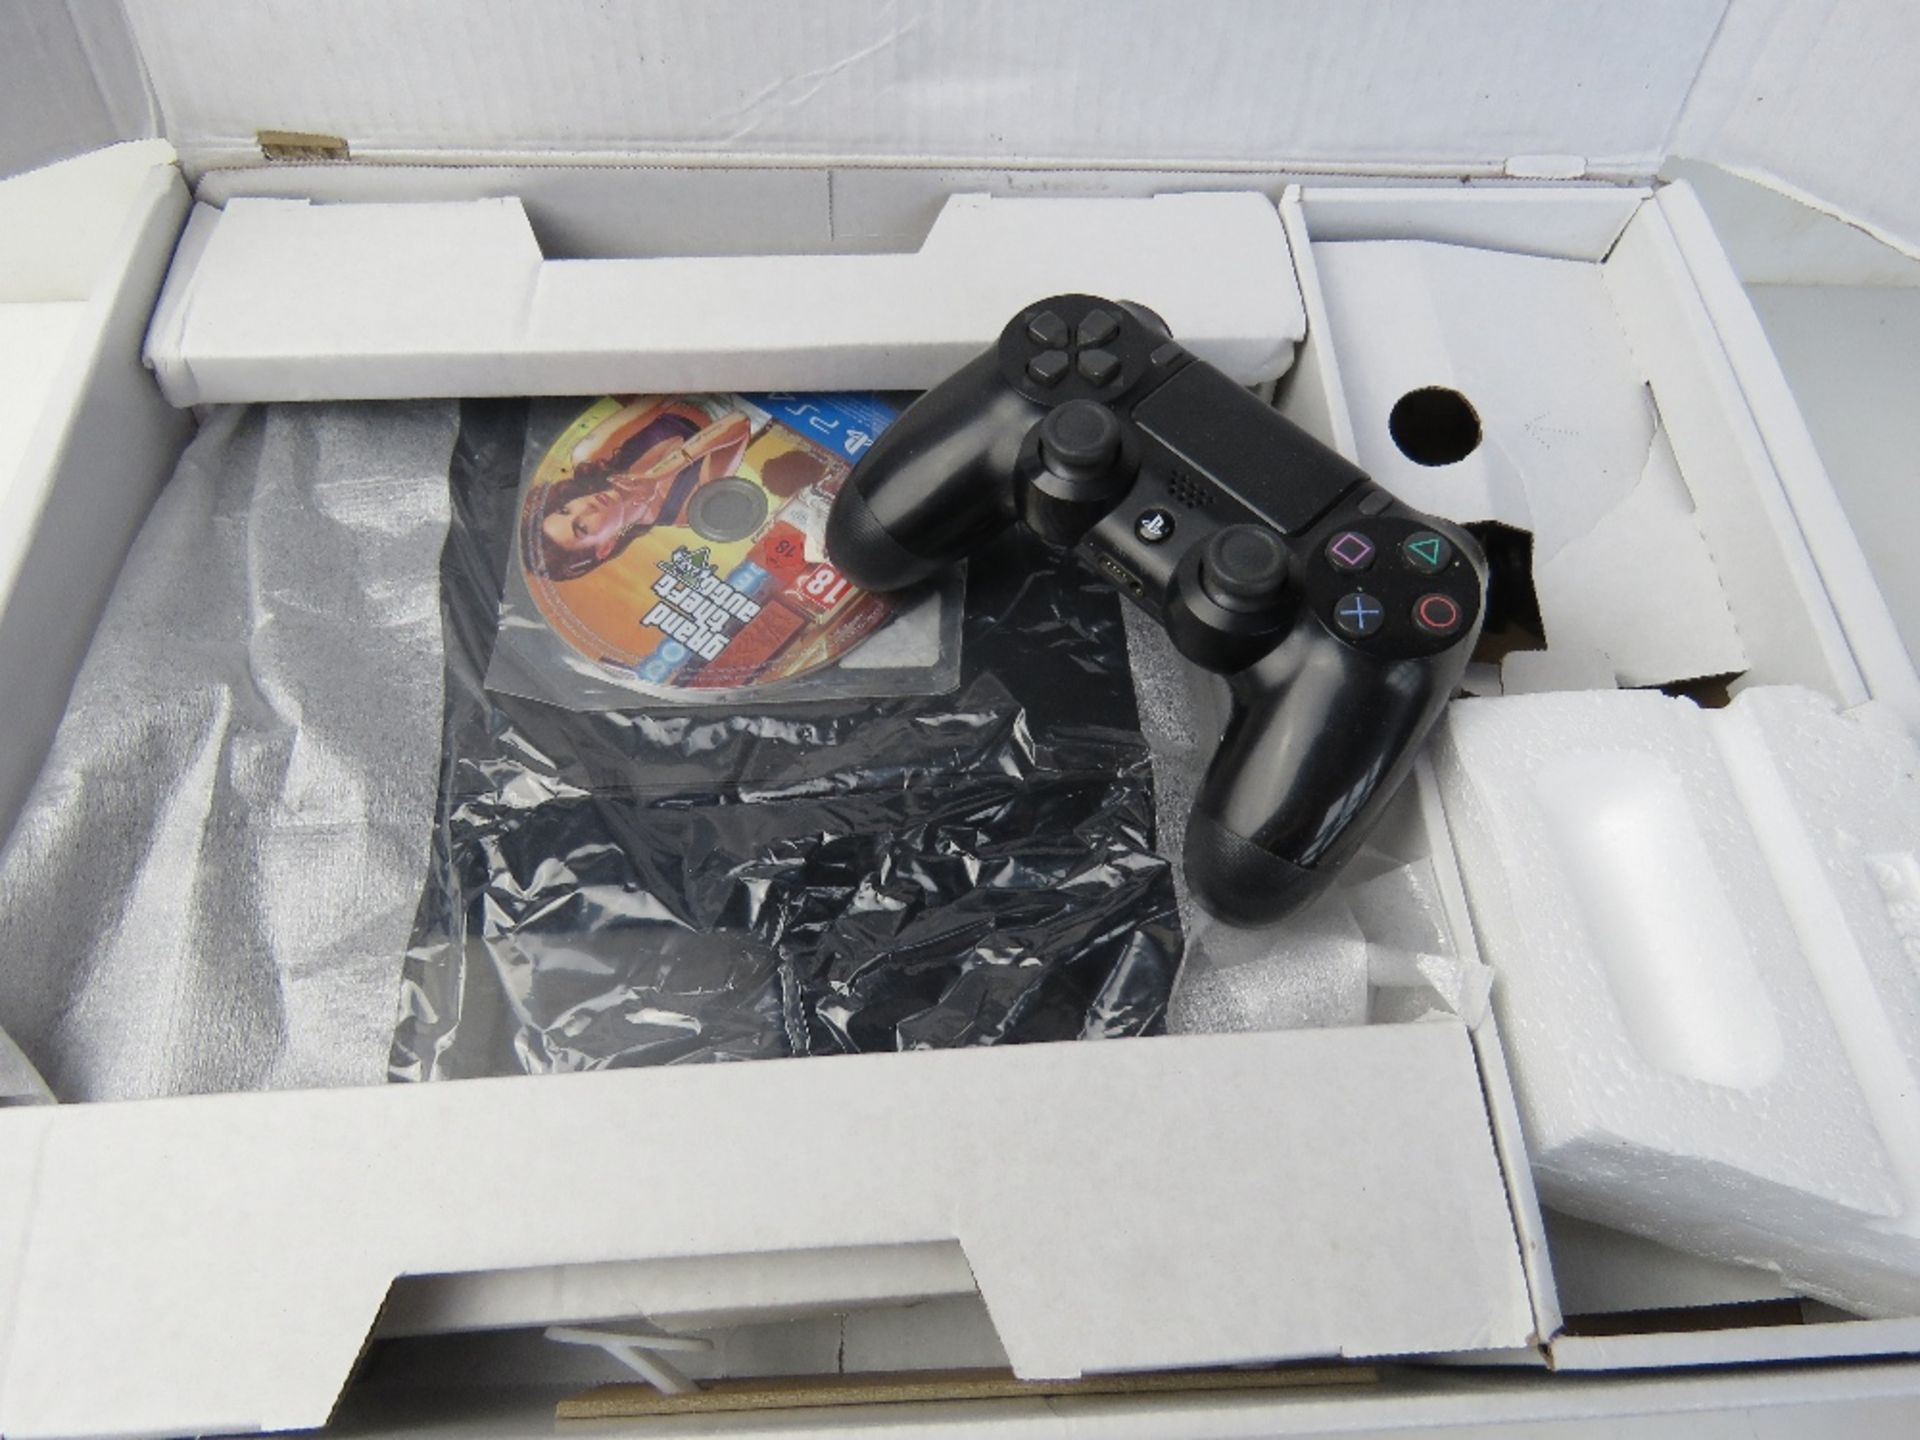 A PS4 Slim console in box with controller and game.